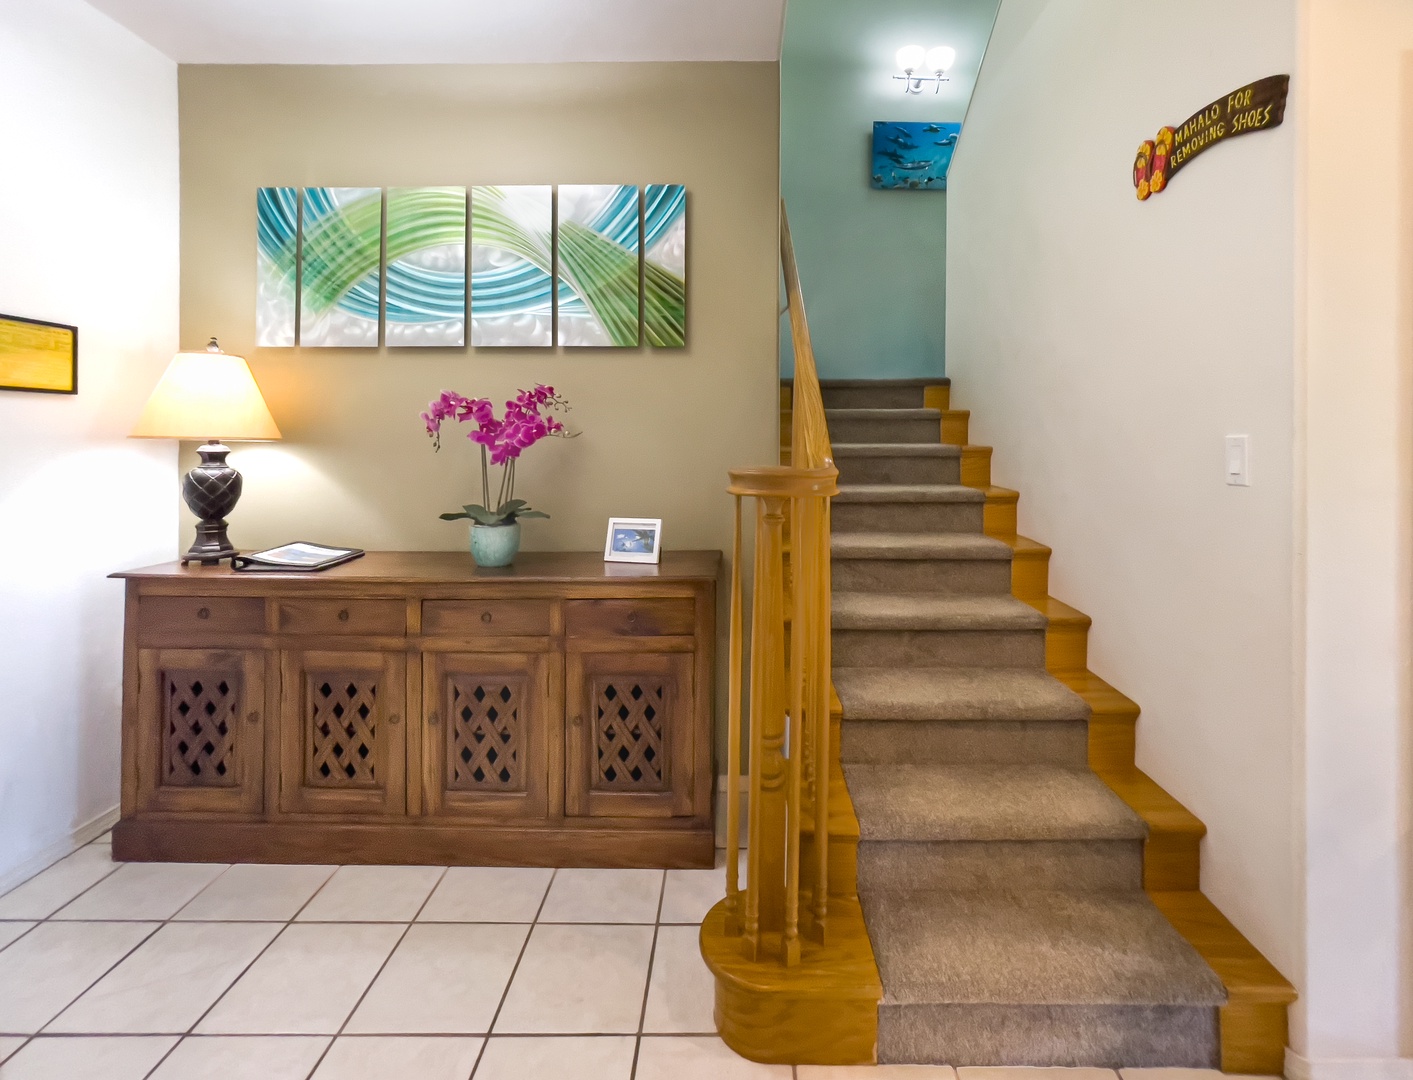 Waikoloa Vacation Rentals, Waikoloa Colony Villas 403 - Entry Hall and Staircase to Upstairs Bedrooms